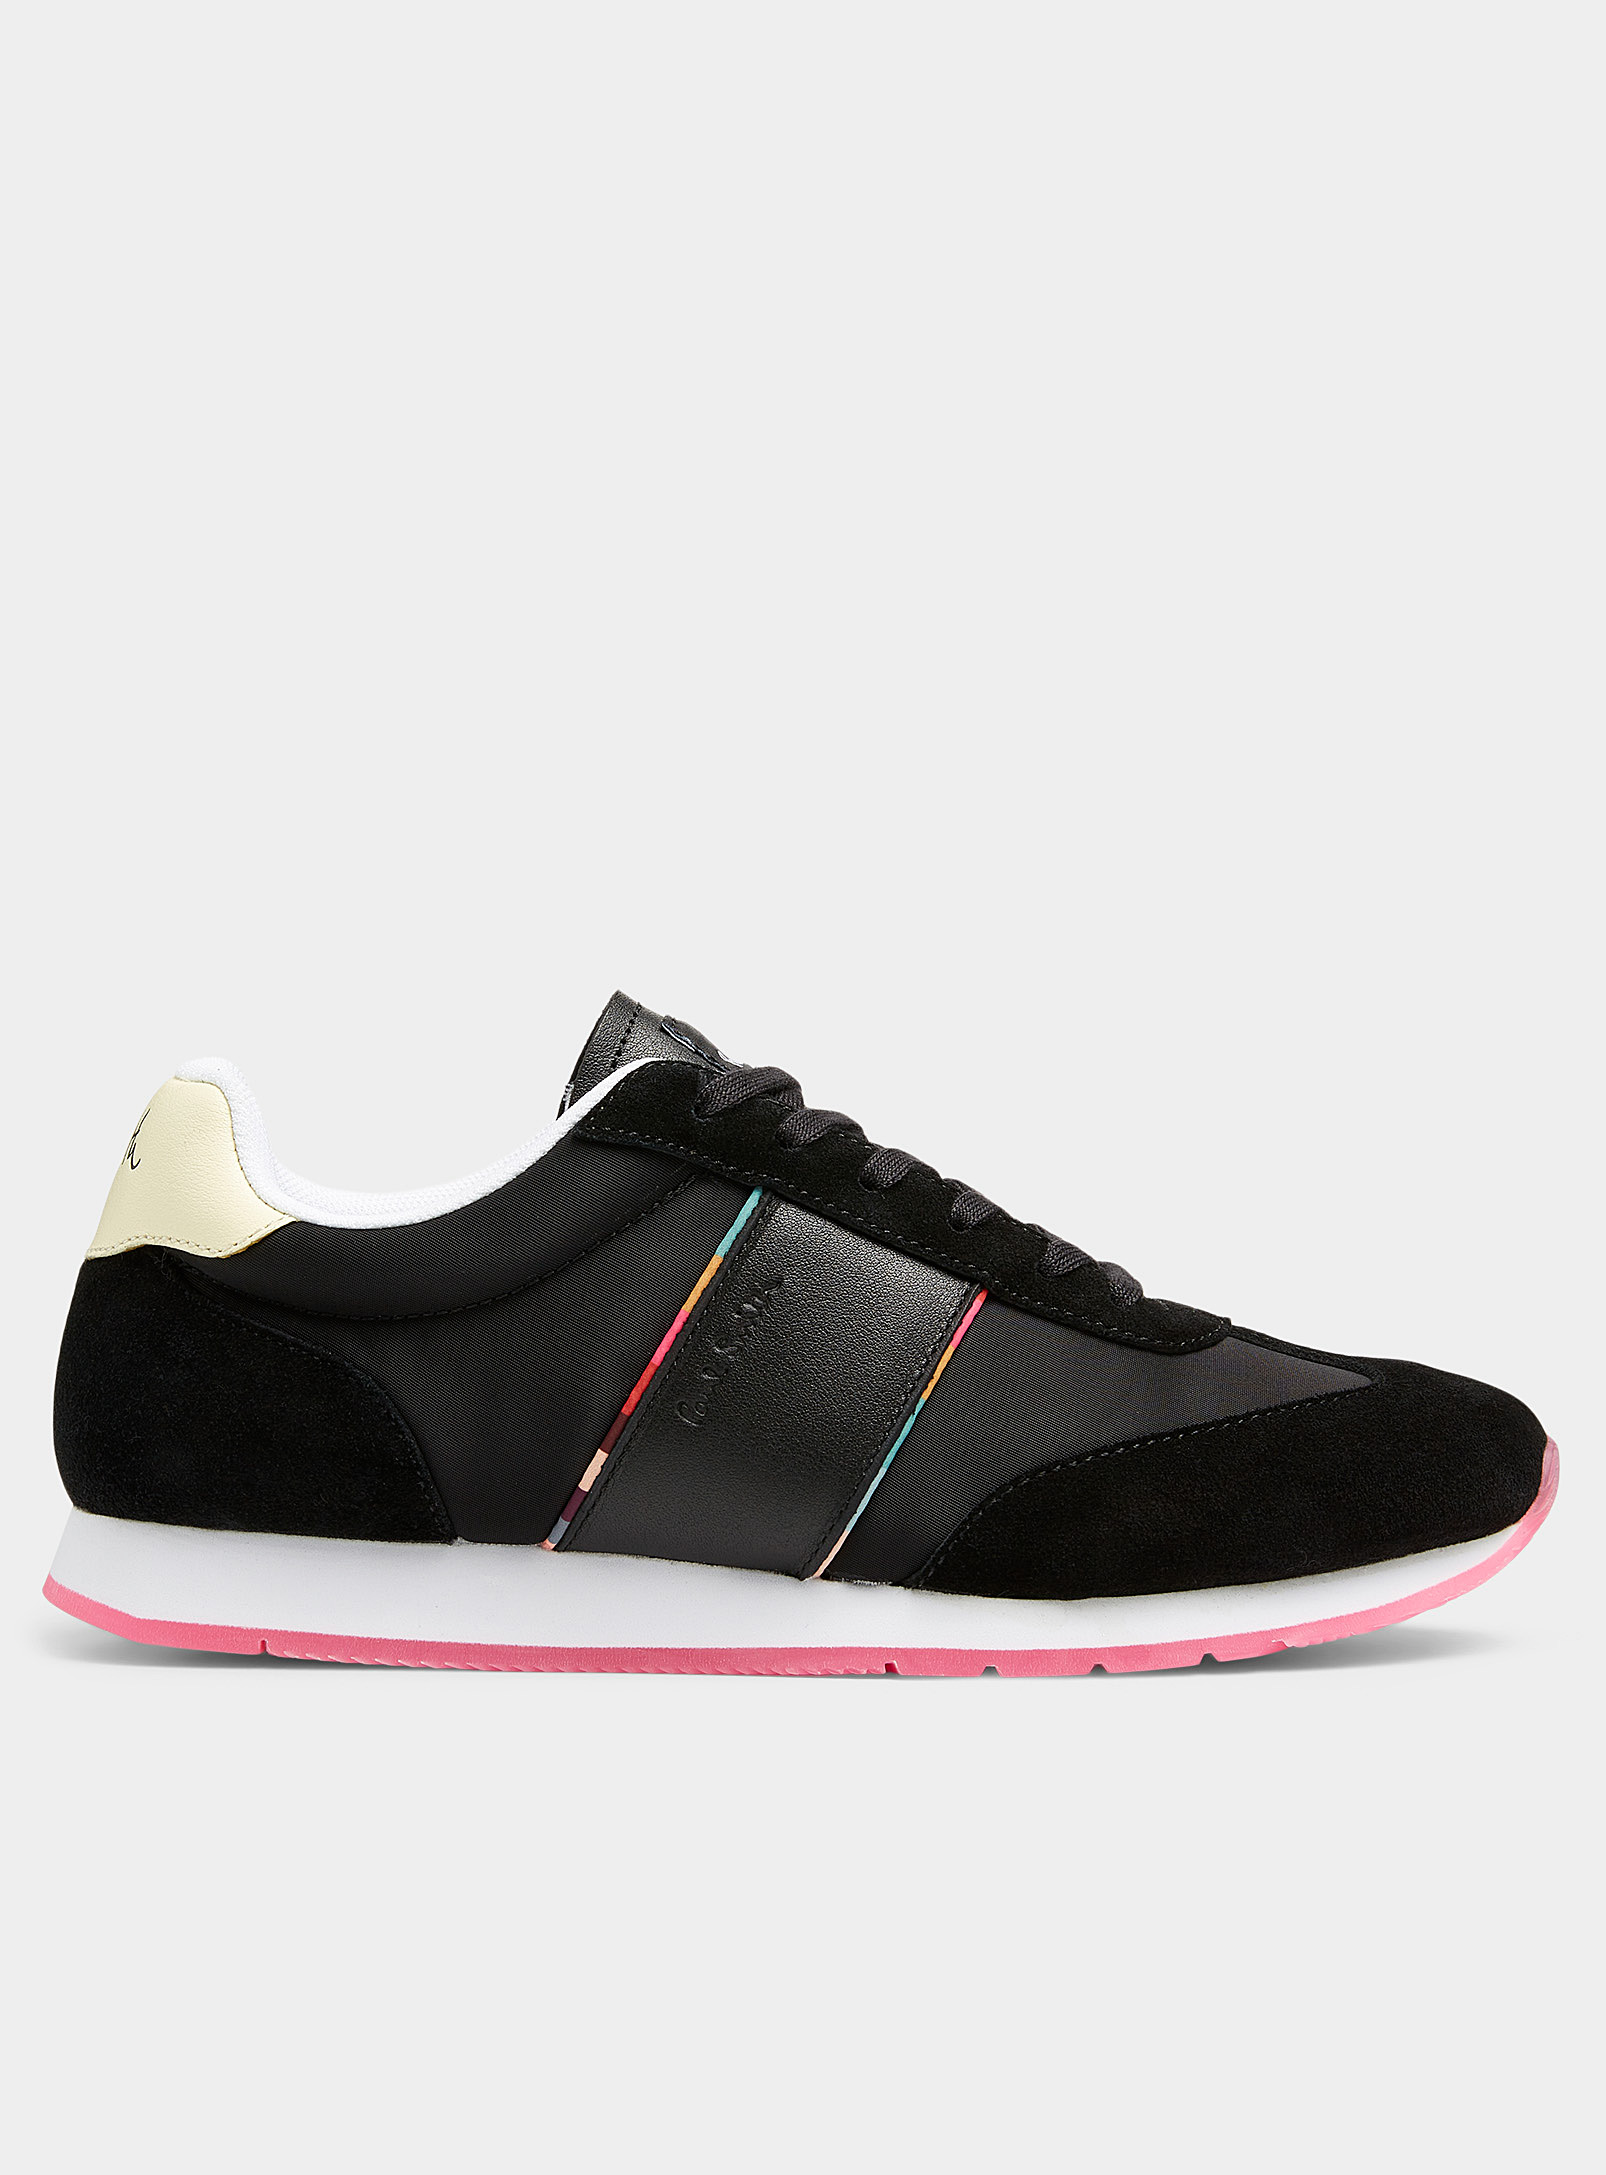 Harry Rosen Paul Smith Lee Leather Sneakers | Square One